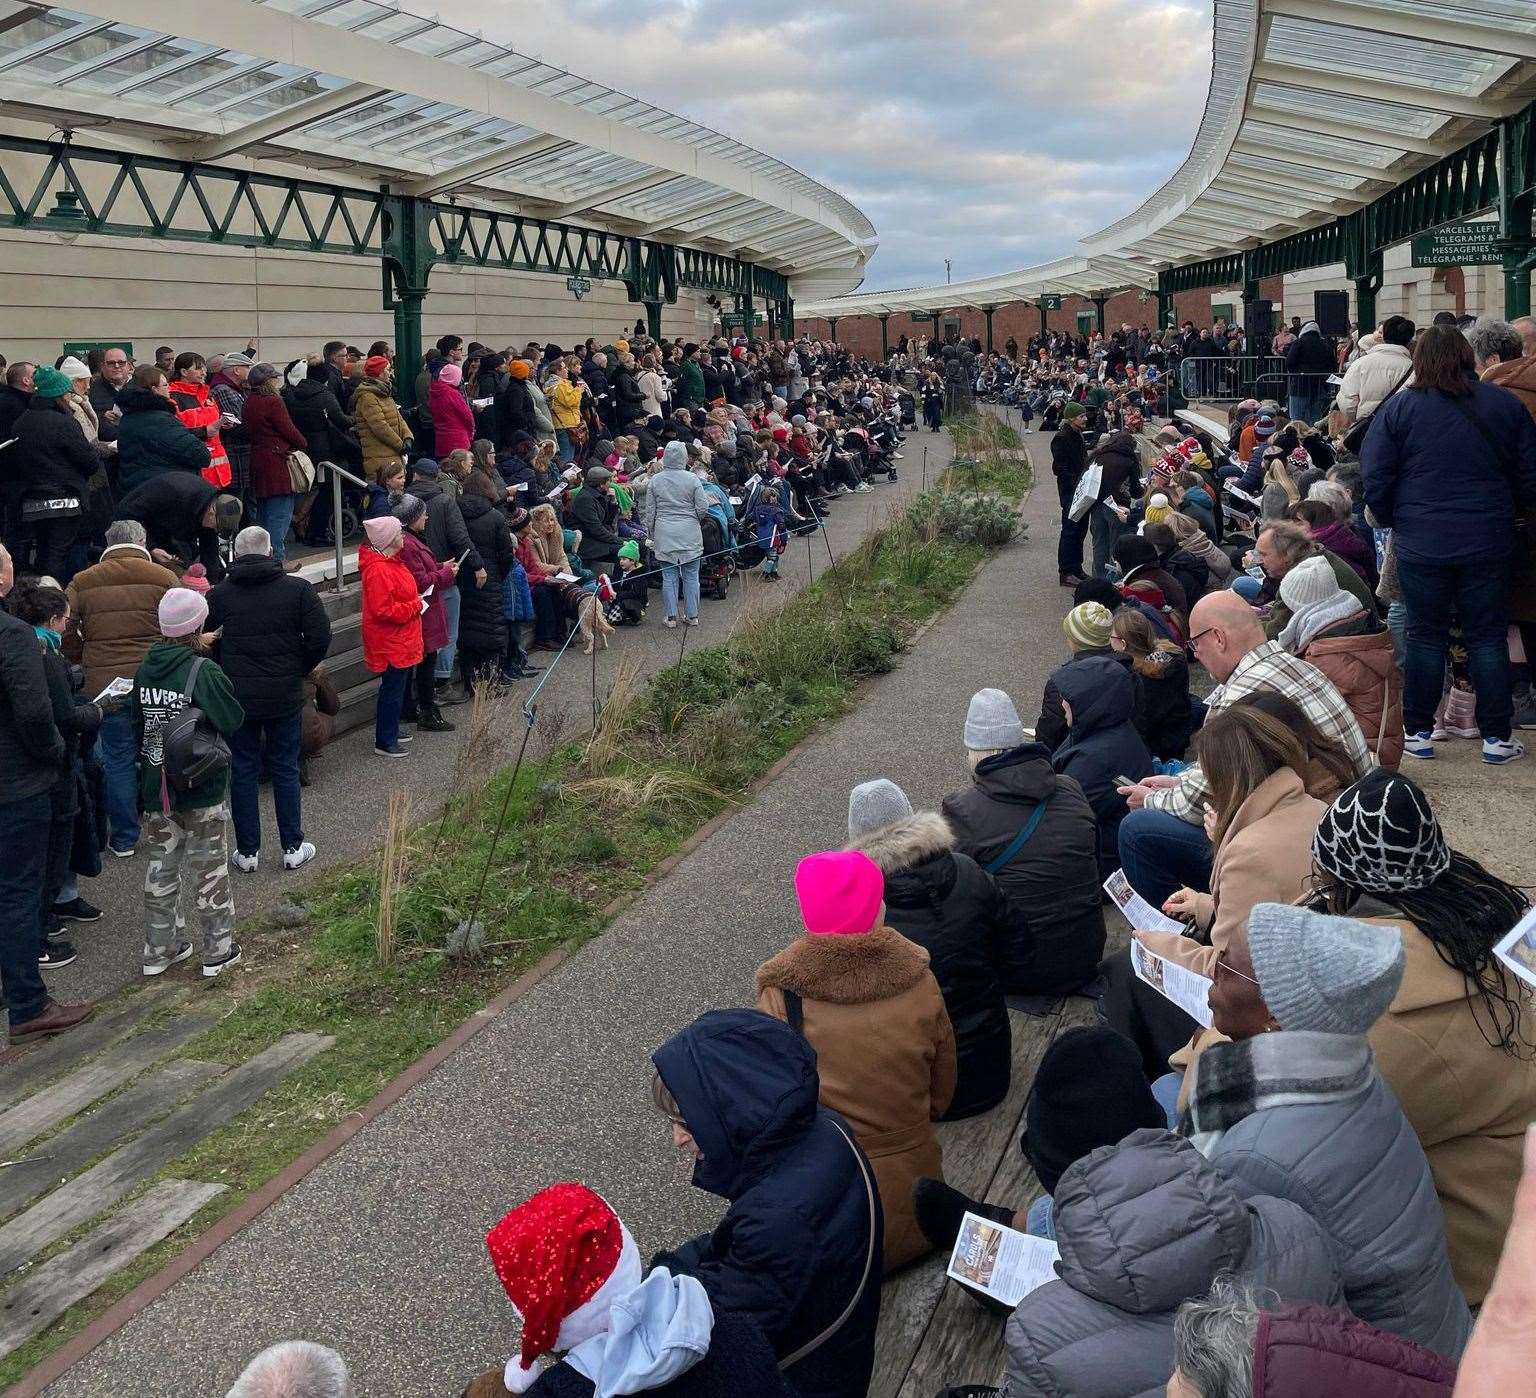 Hundreds were in attendance to watch and listen to the carols. Picture: Steve Baughan